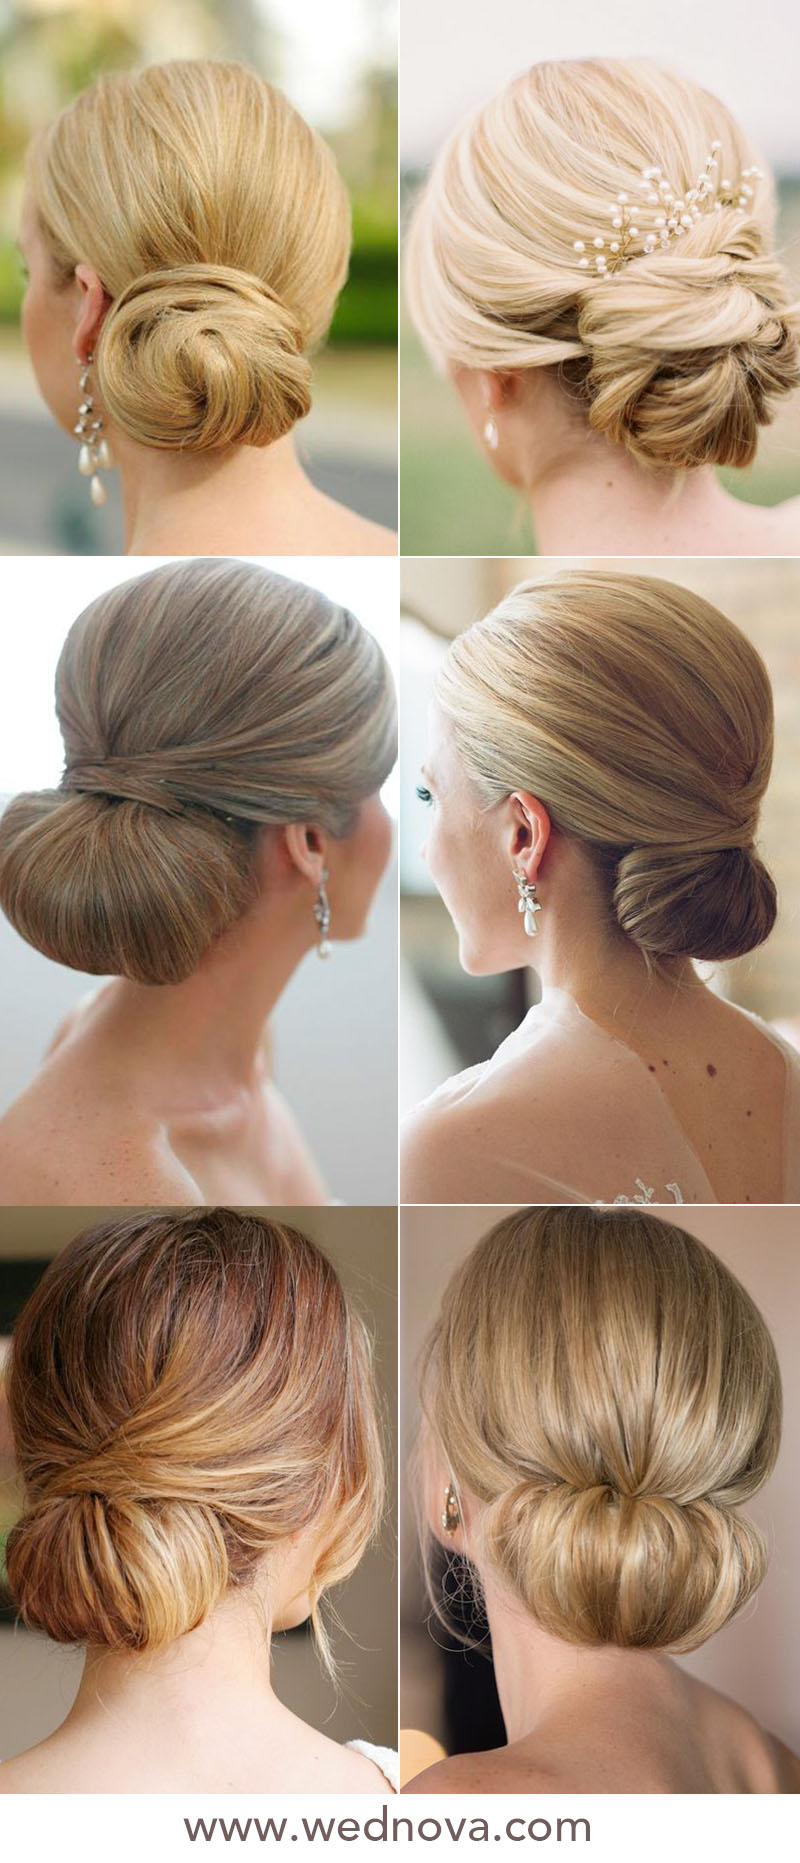 48 Easy Wedding Hairstyles Best Guide For Your Bridesmaids